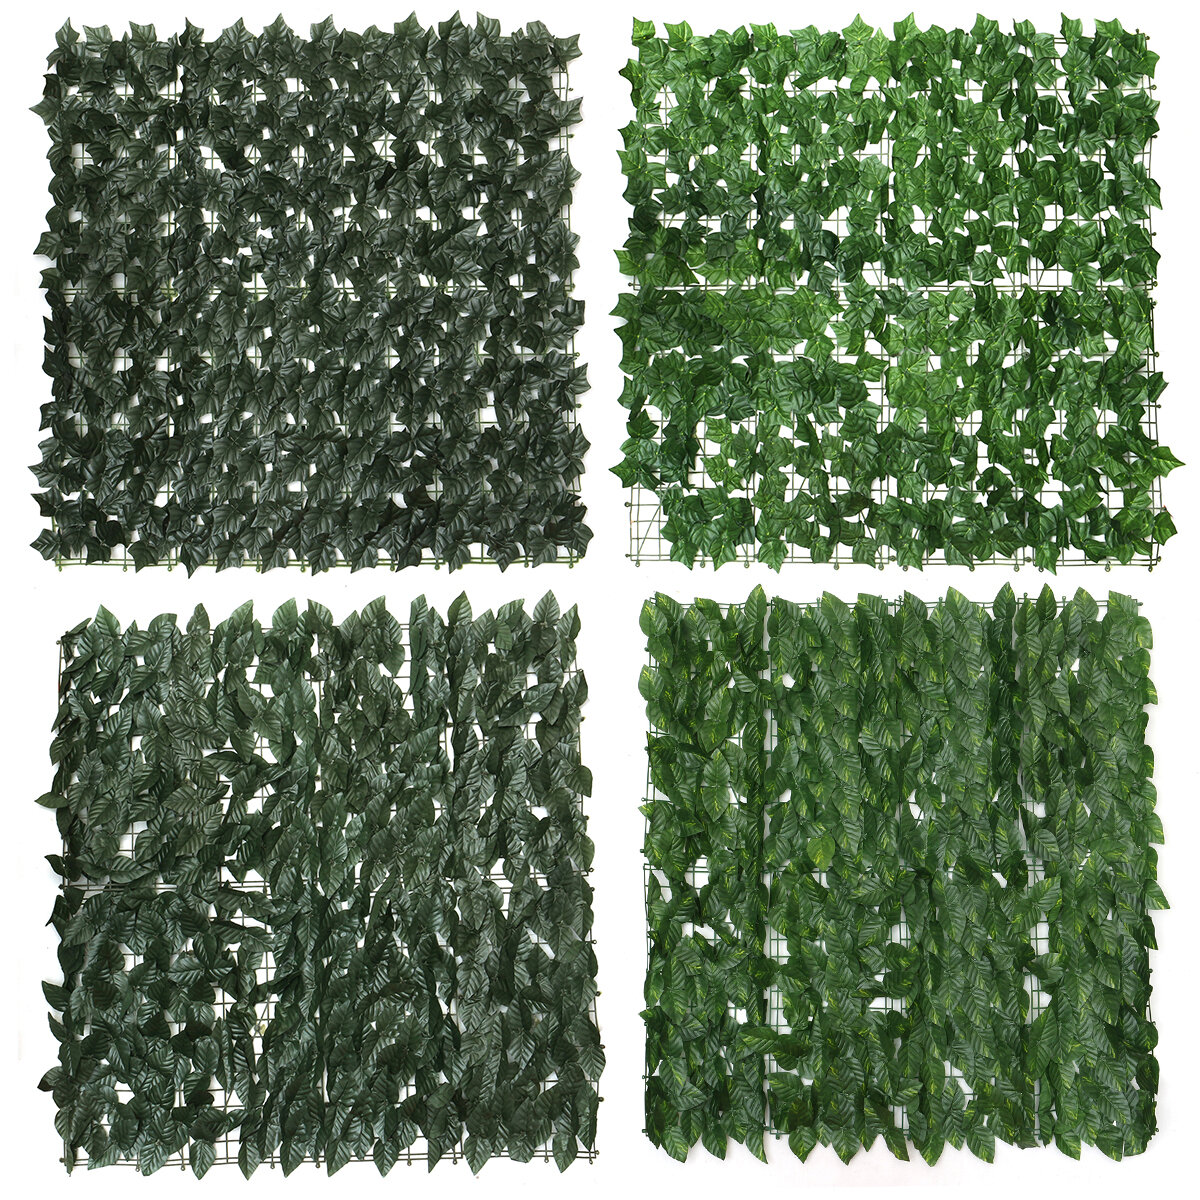 1x1M Artificial Faux Ivy Leaf Privacy Fence Screen Hedge Decor Panels Home Garden Outdoor